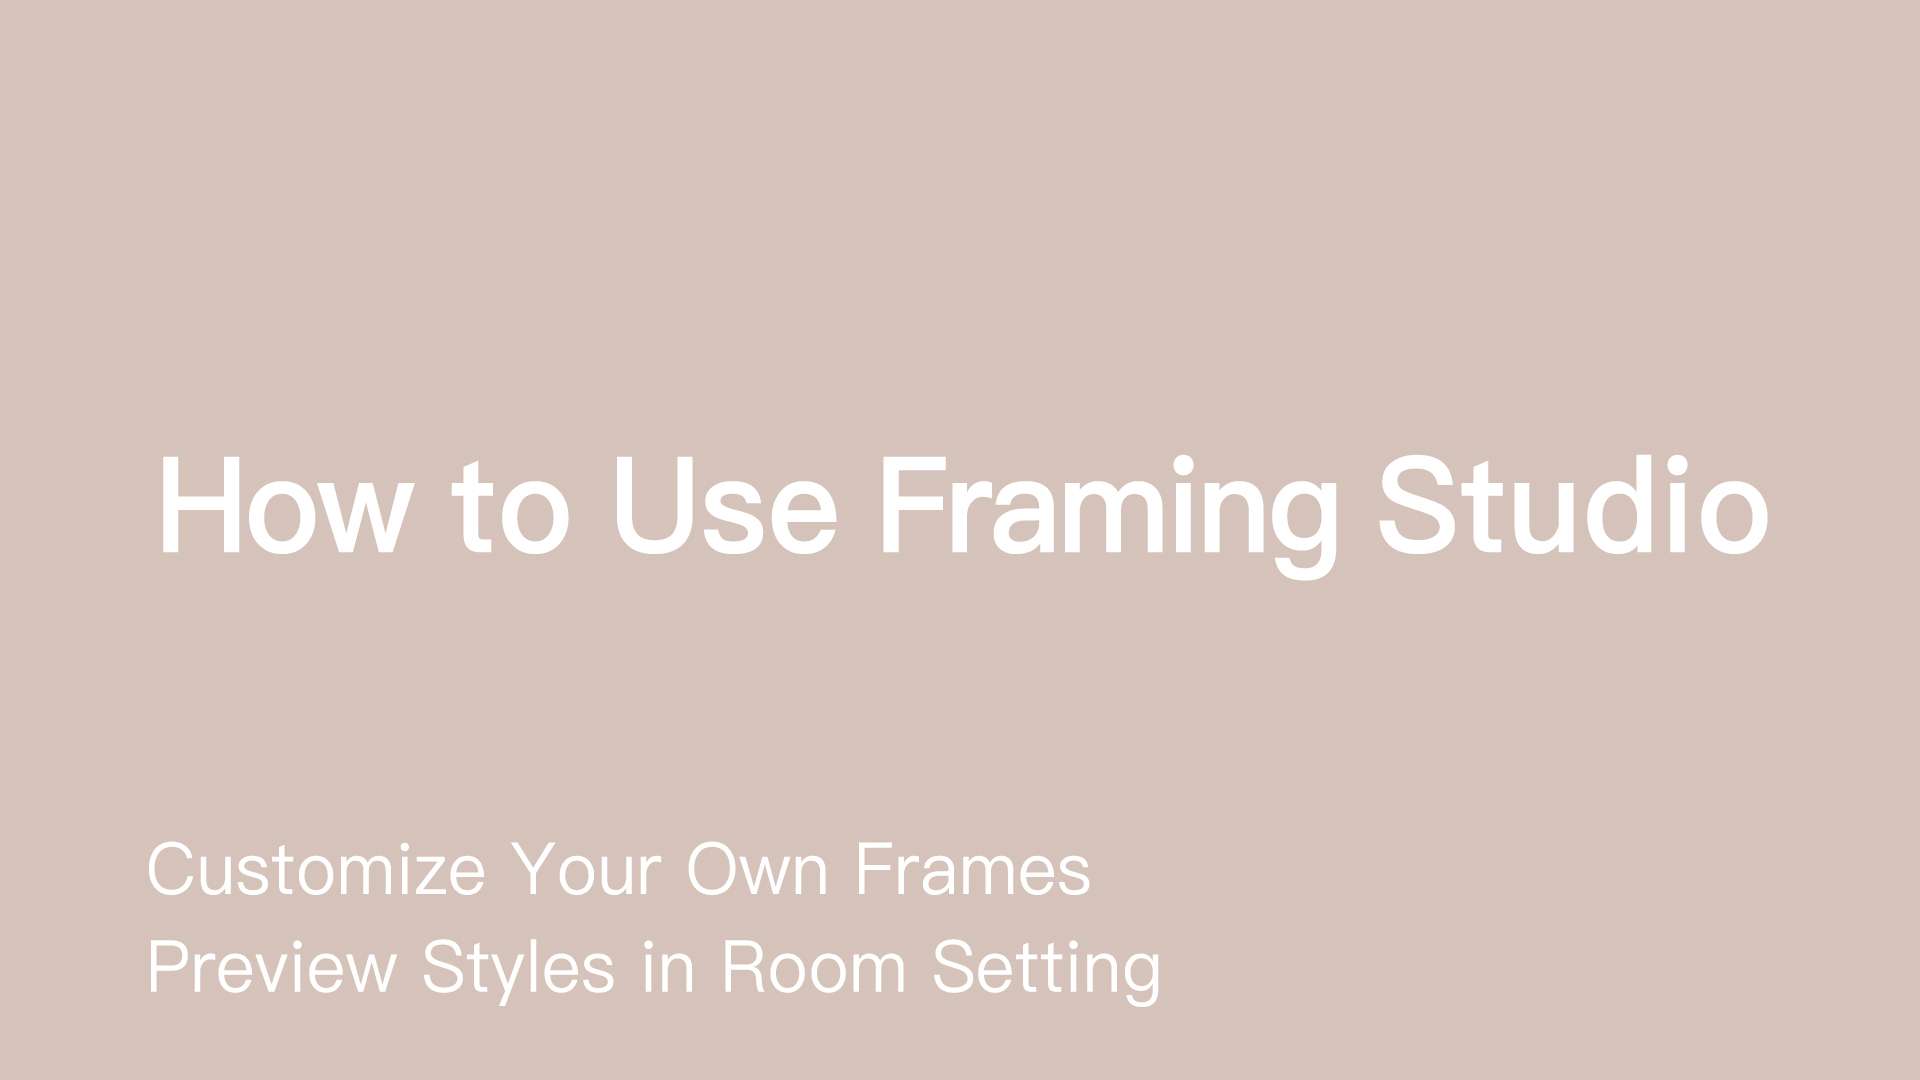 How to Use Framing Studio